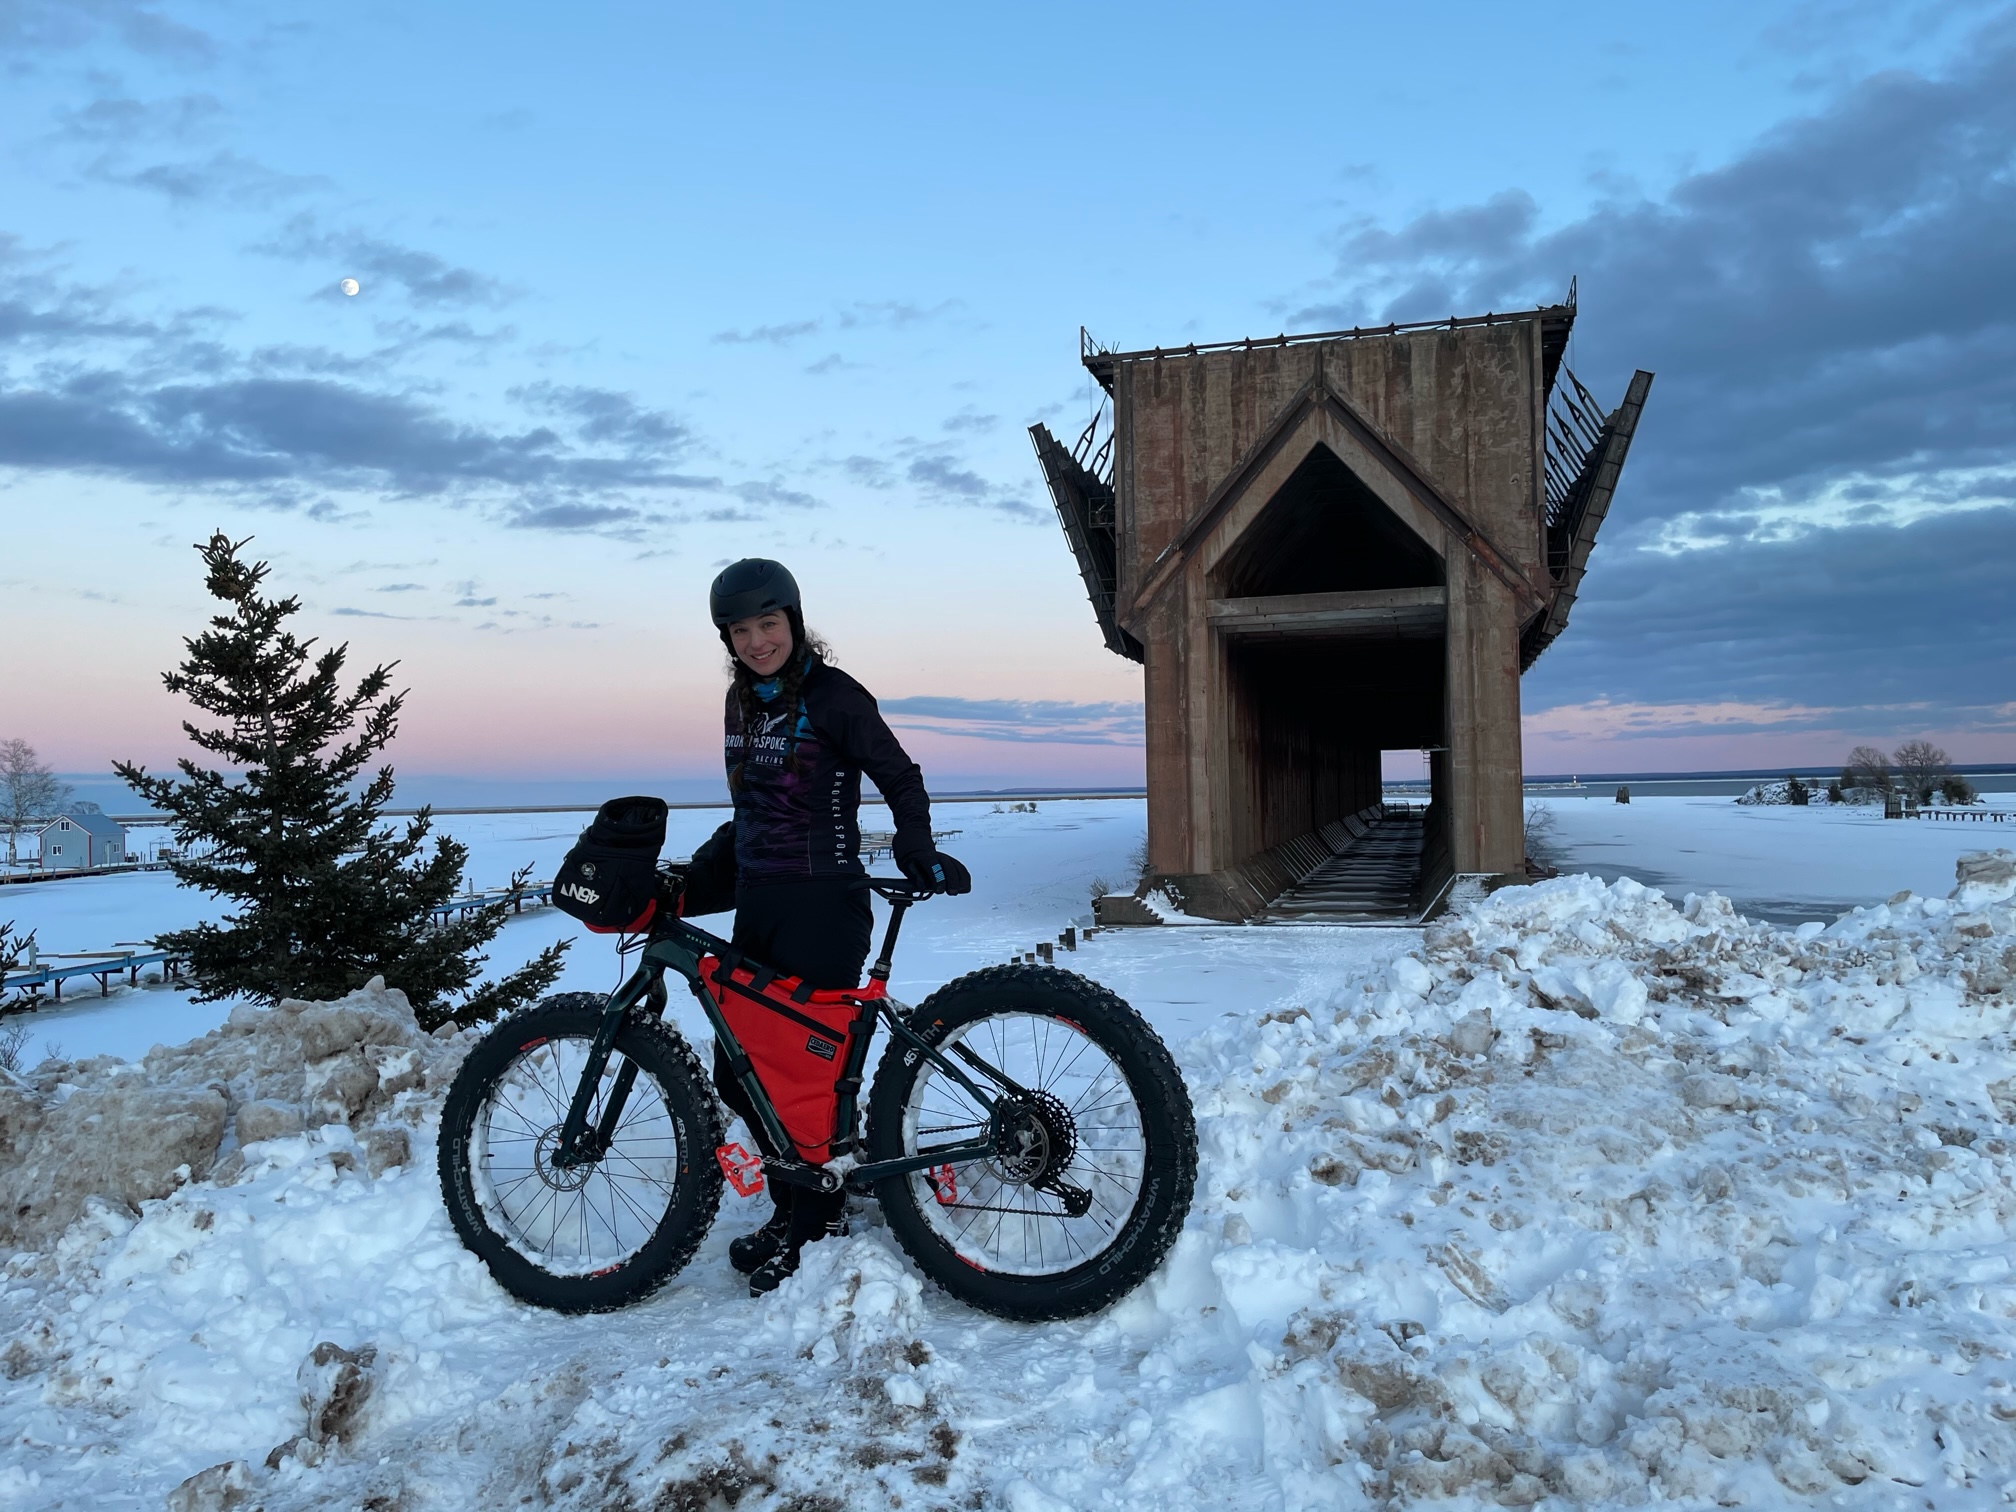 Laura Hrubes of Viroqua stops on her fat bike in front of the old ore dock in Marquette, Mich.